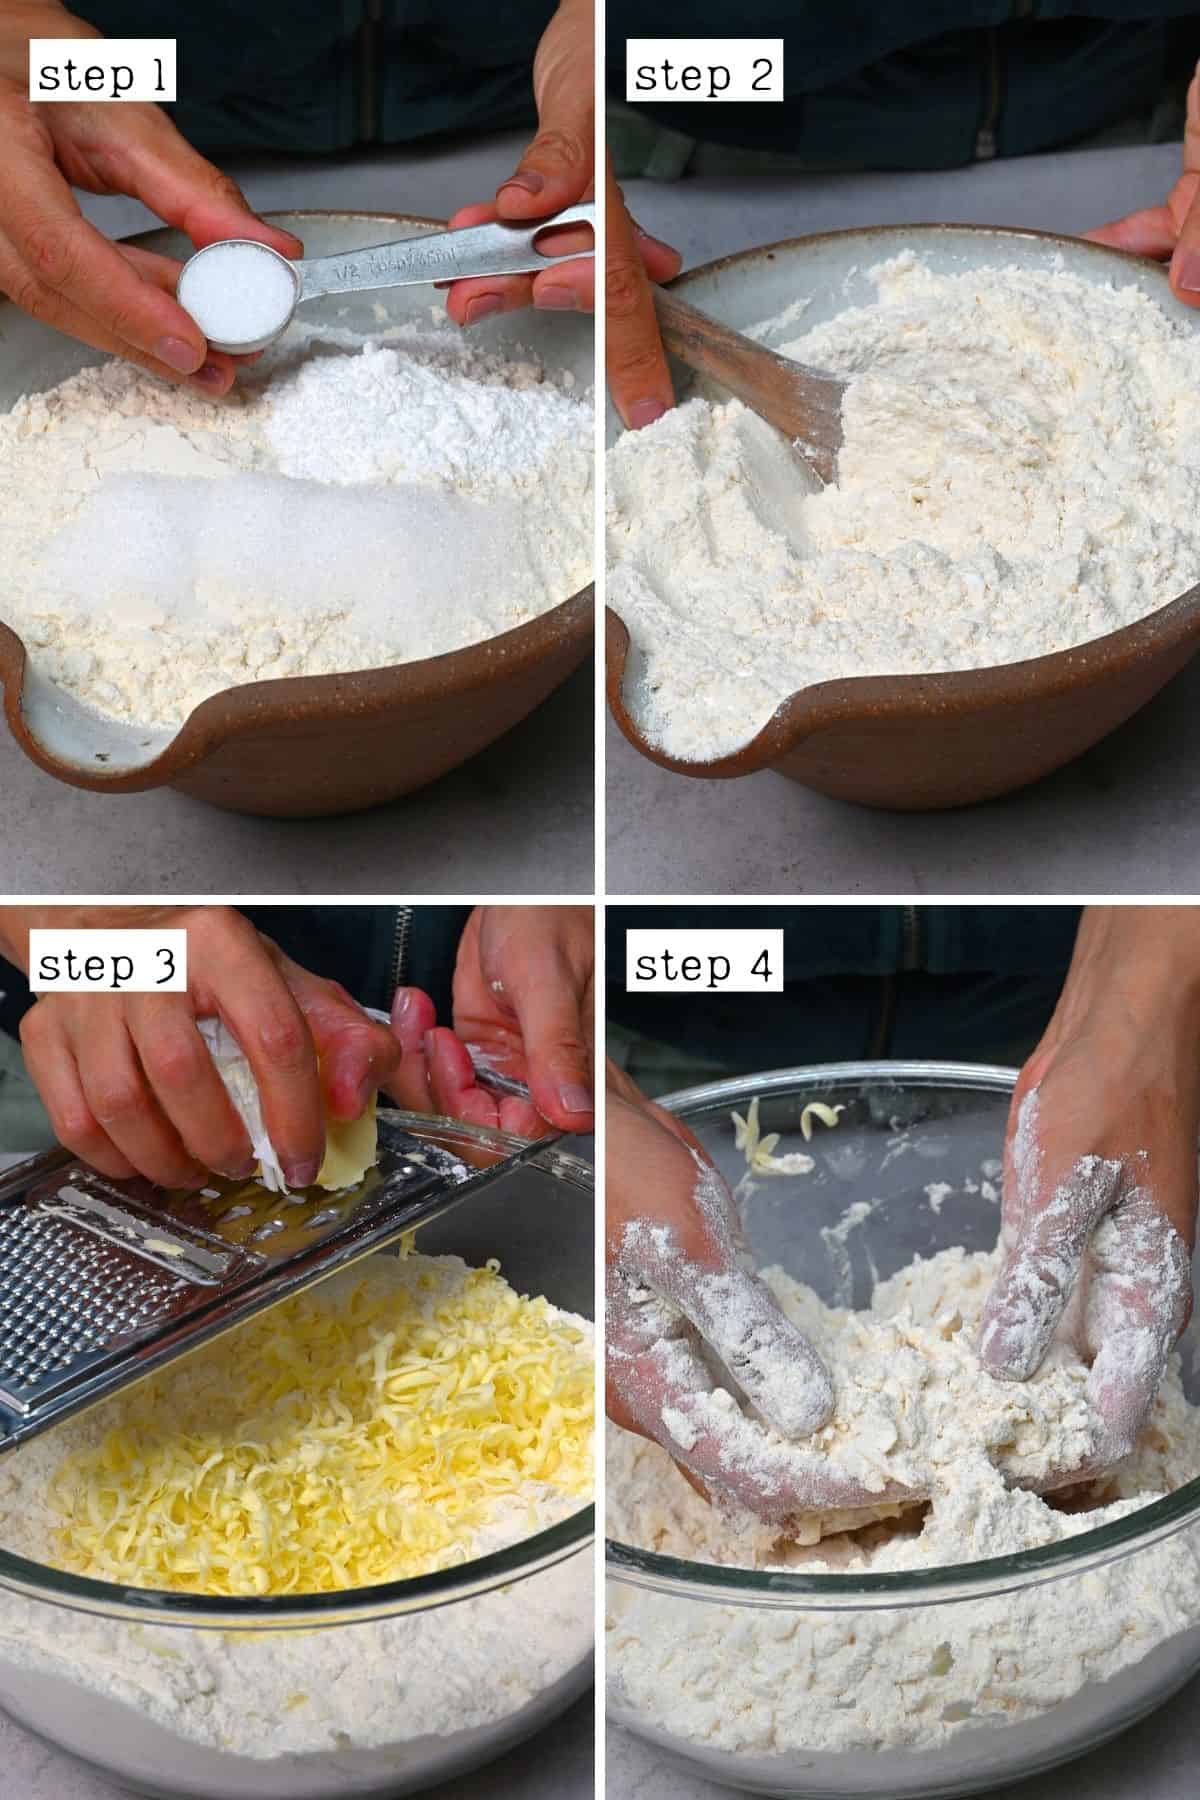 Steps for mixing flour and butter